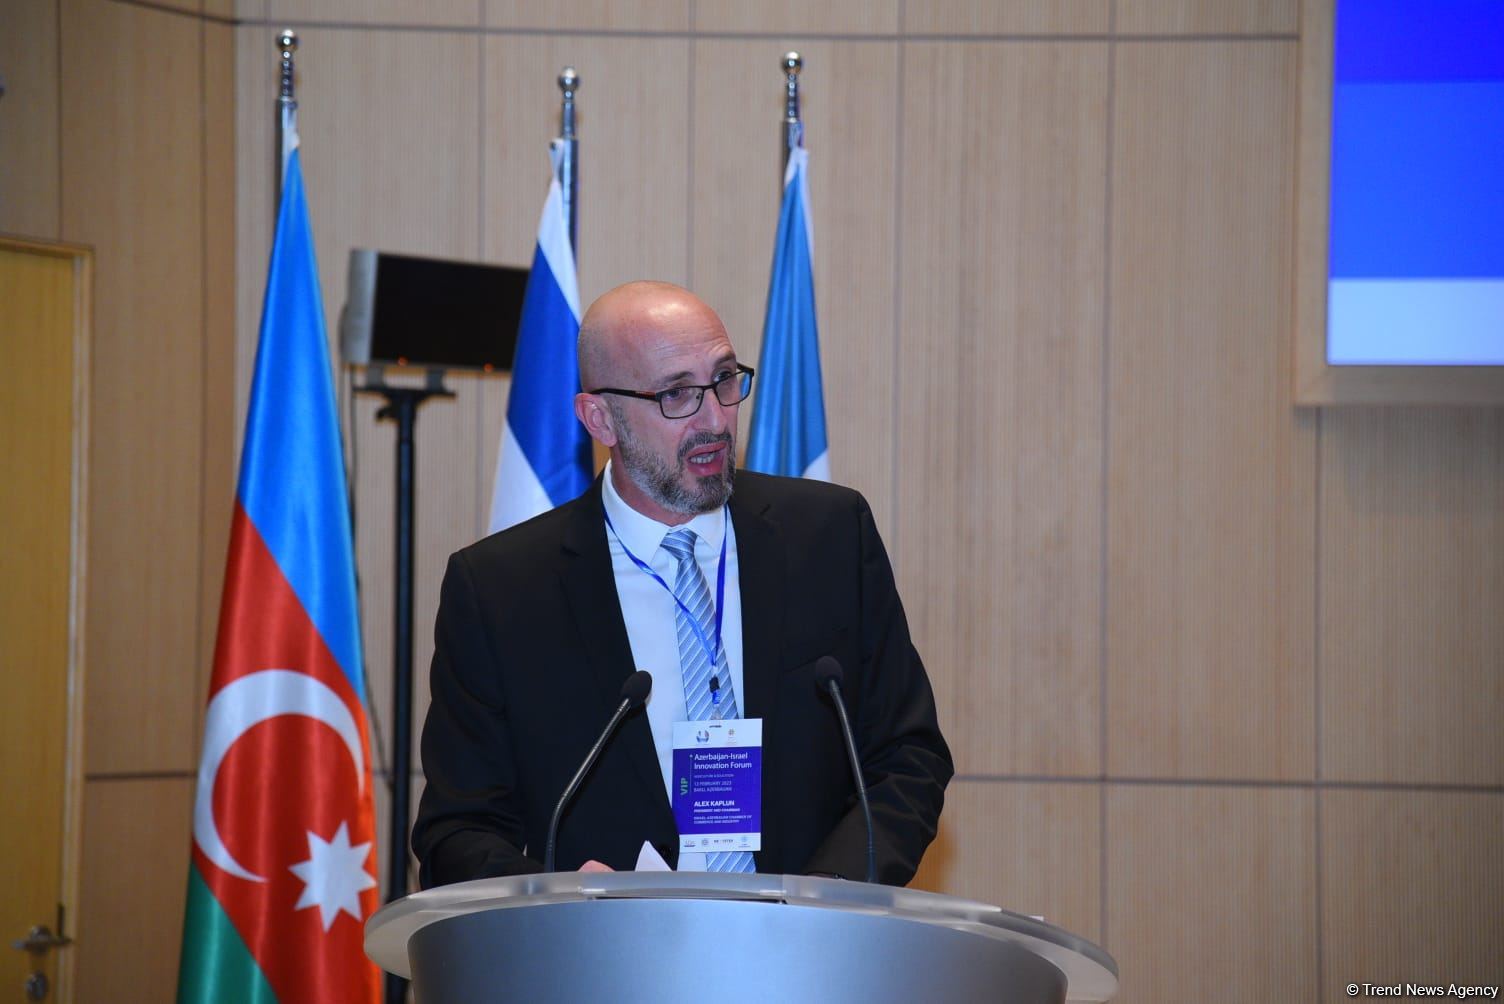 Israel develops relations with Azerbaijan in innovations field - Chamber of Commerce (PHOTO)